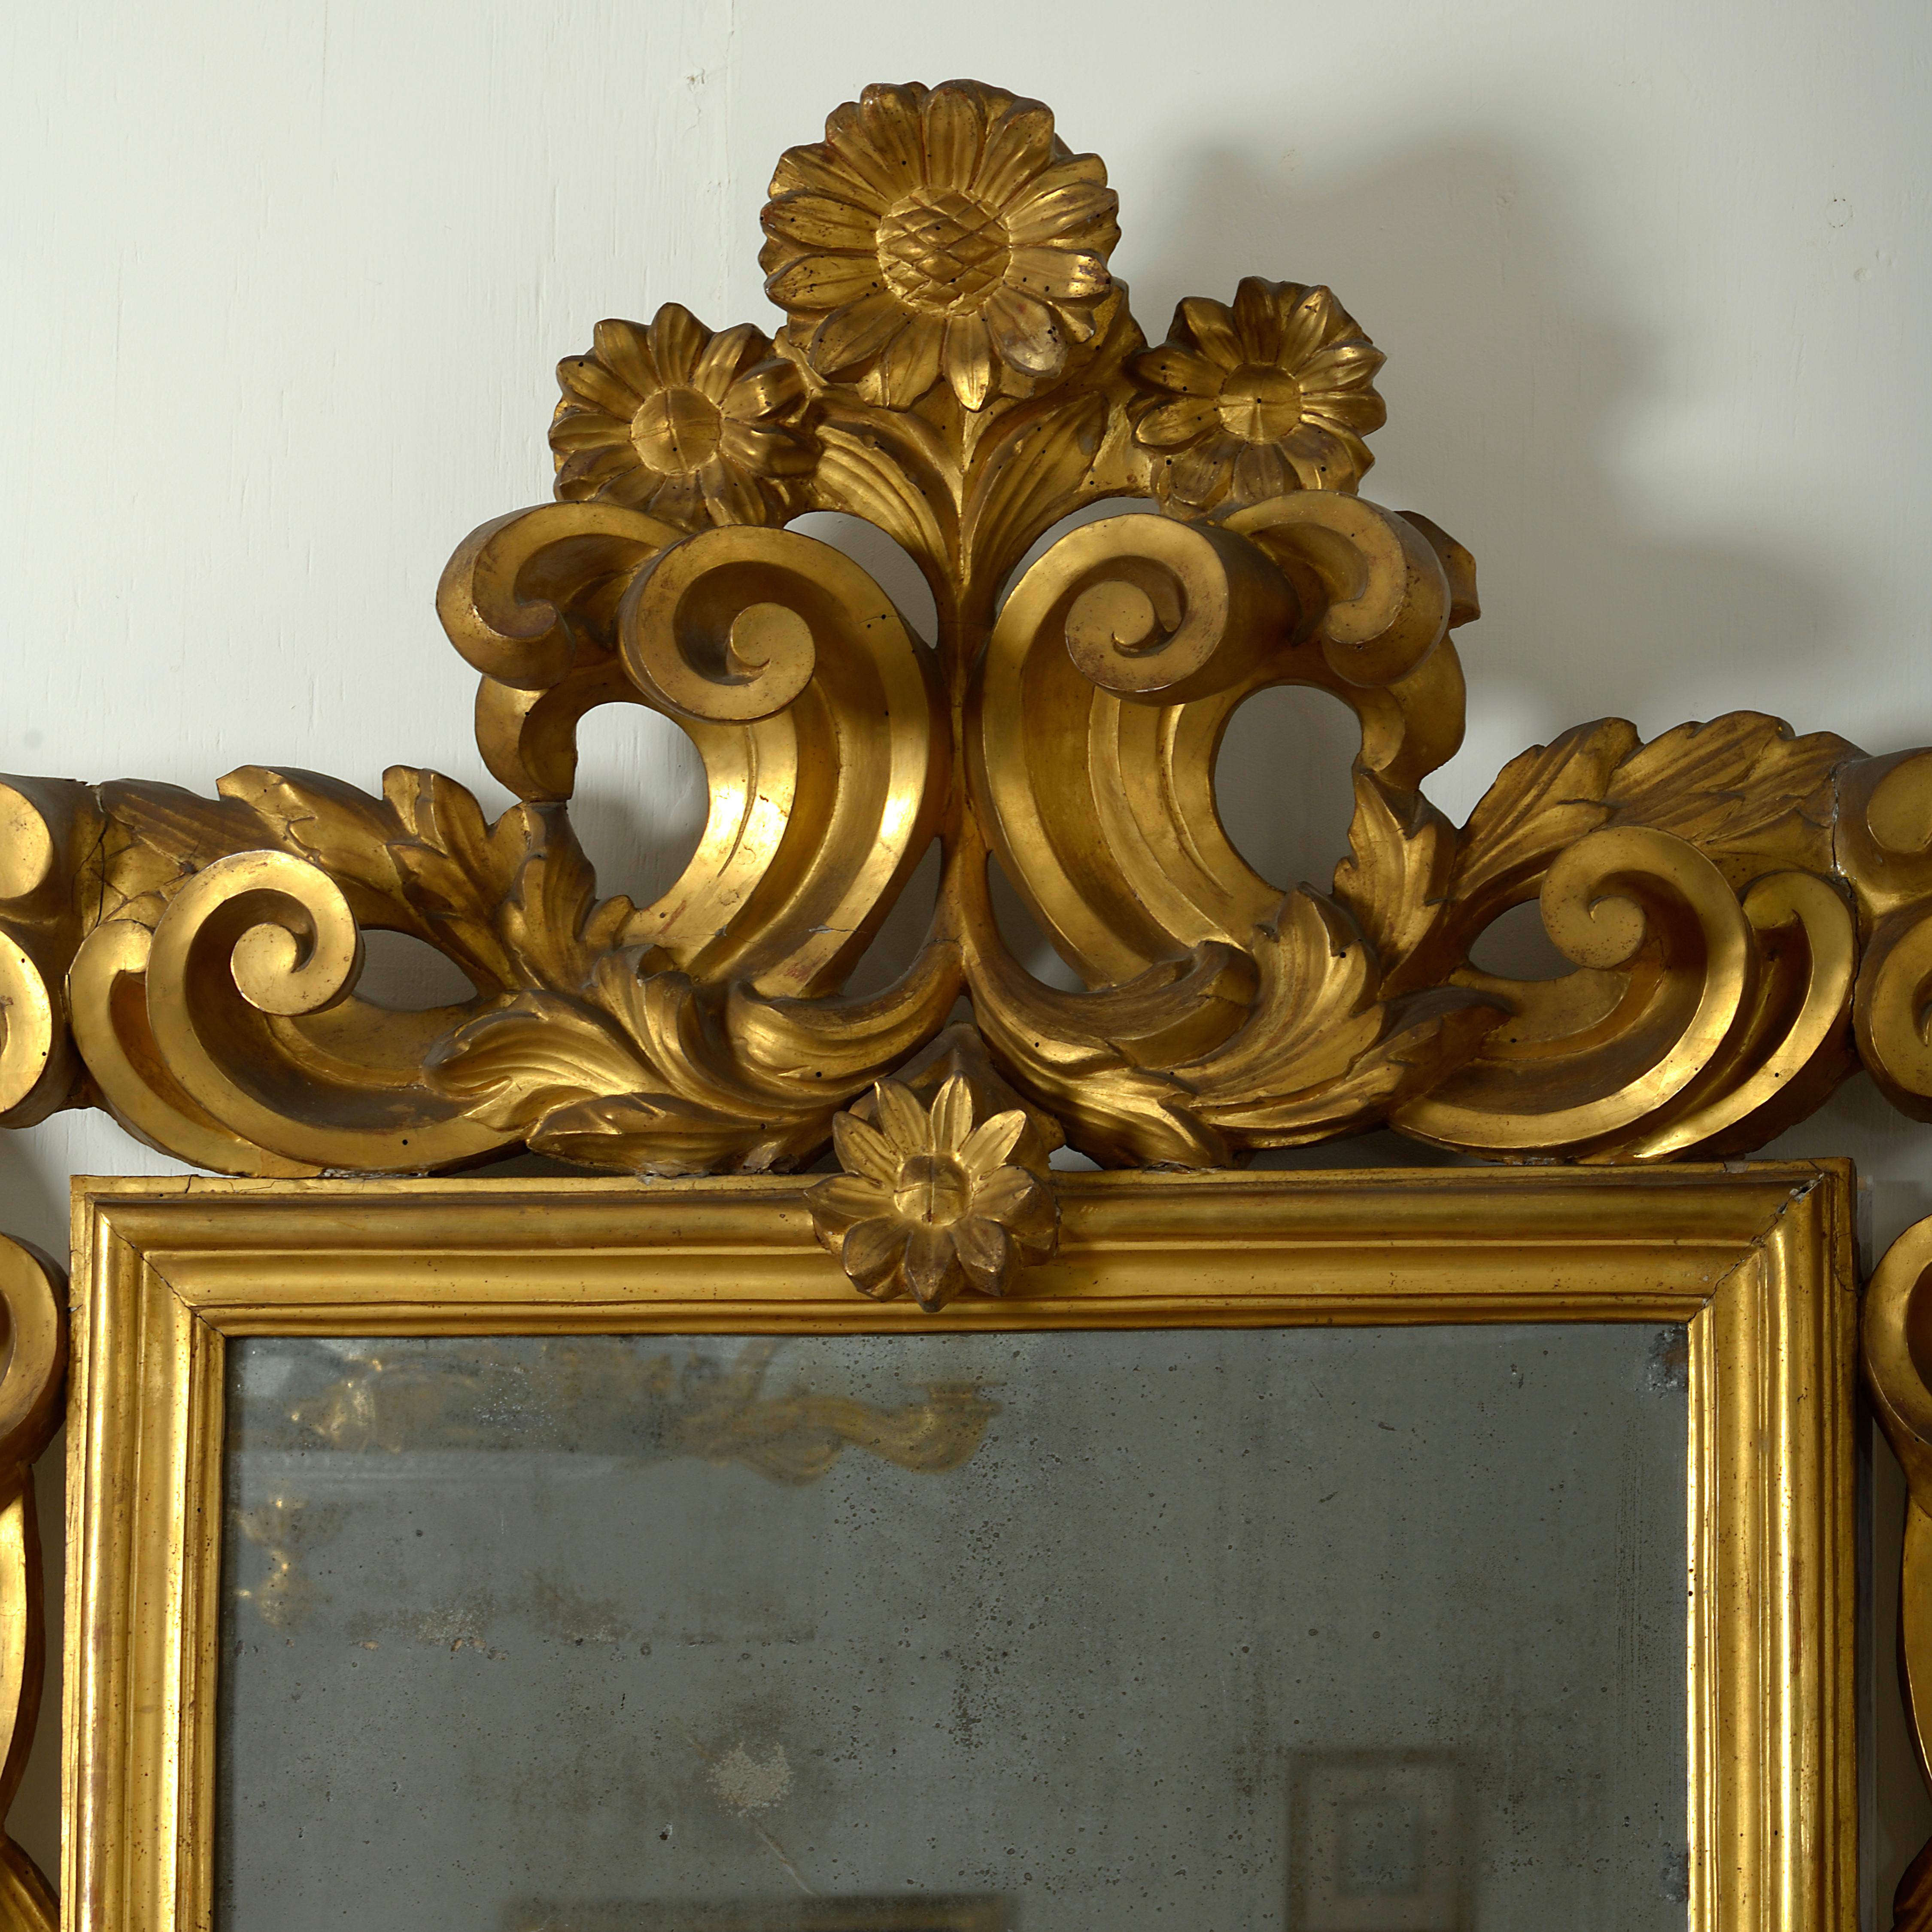 A magnificent roman baroque giltwood mirror boldly carved with interlaced scrolls, acanthus and sunflowers, circa 1680.

With original gilding.